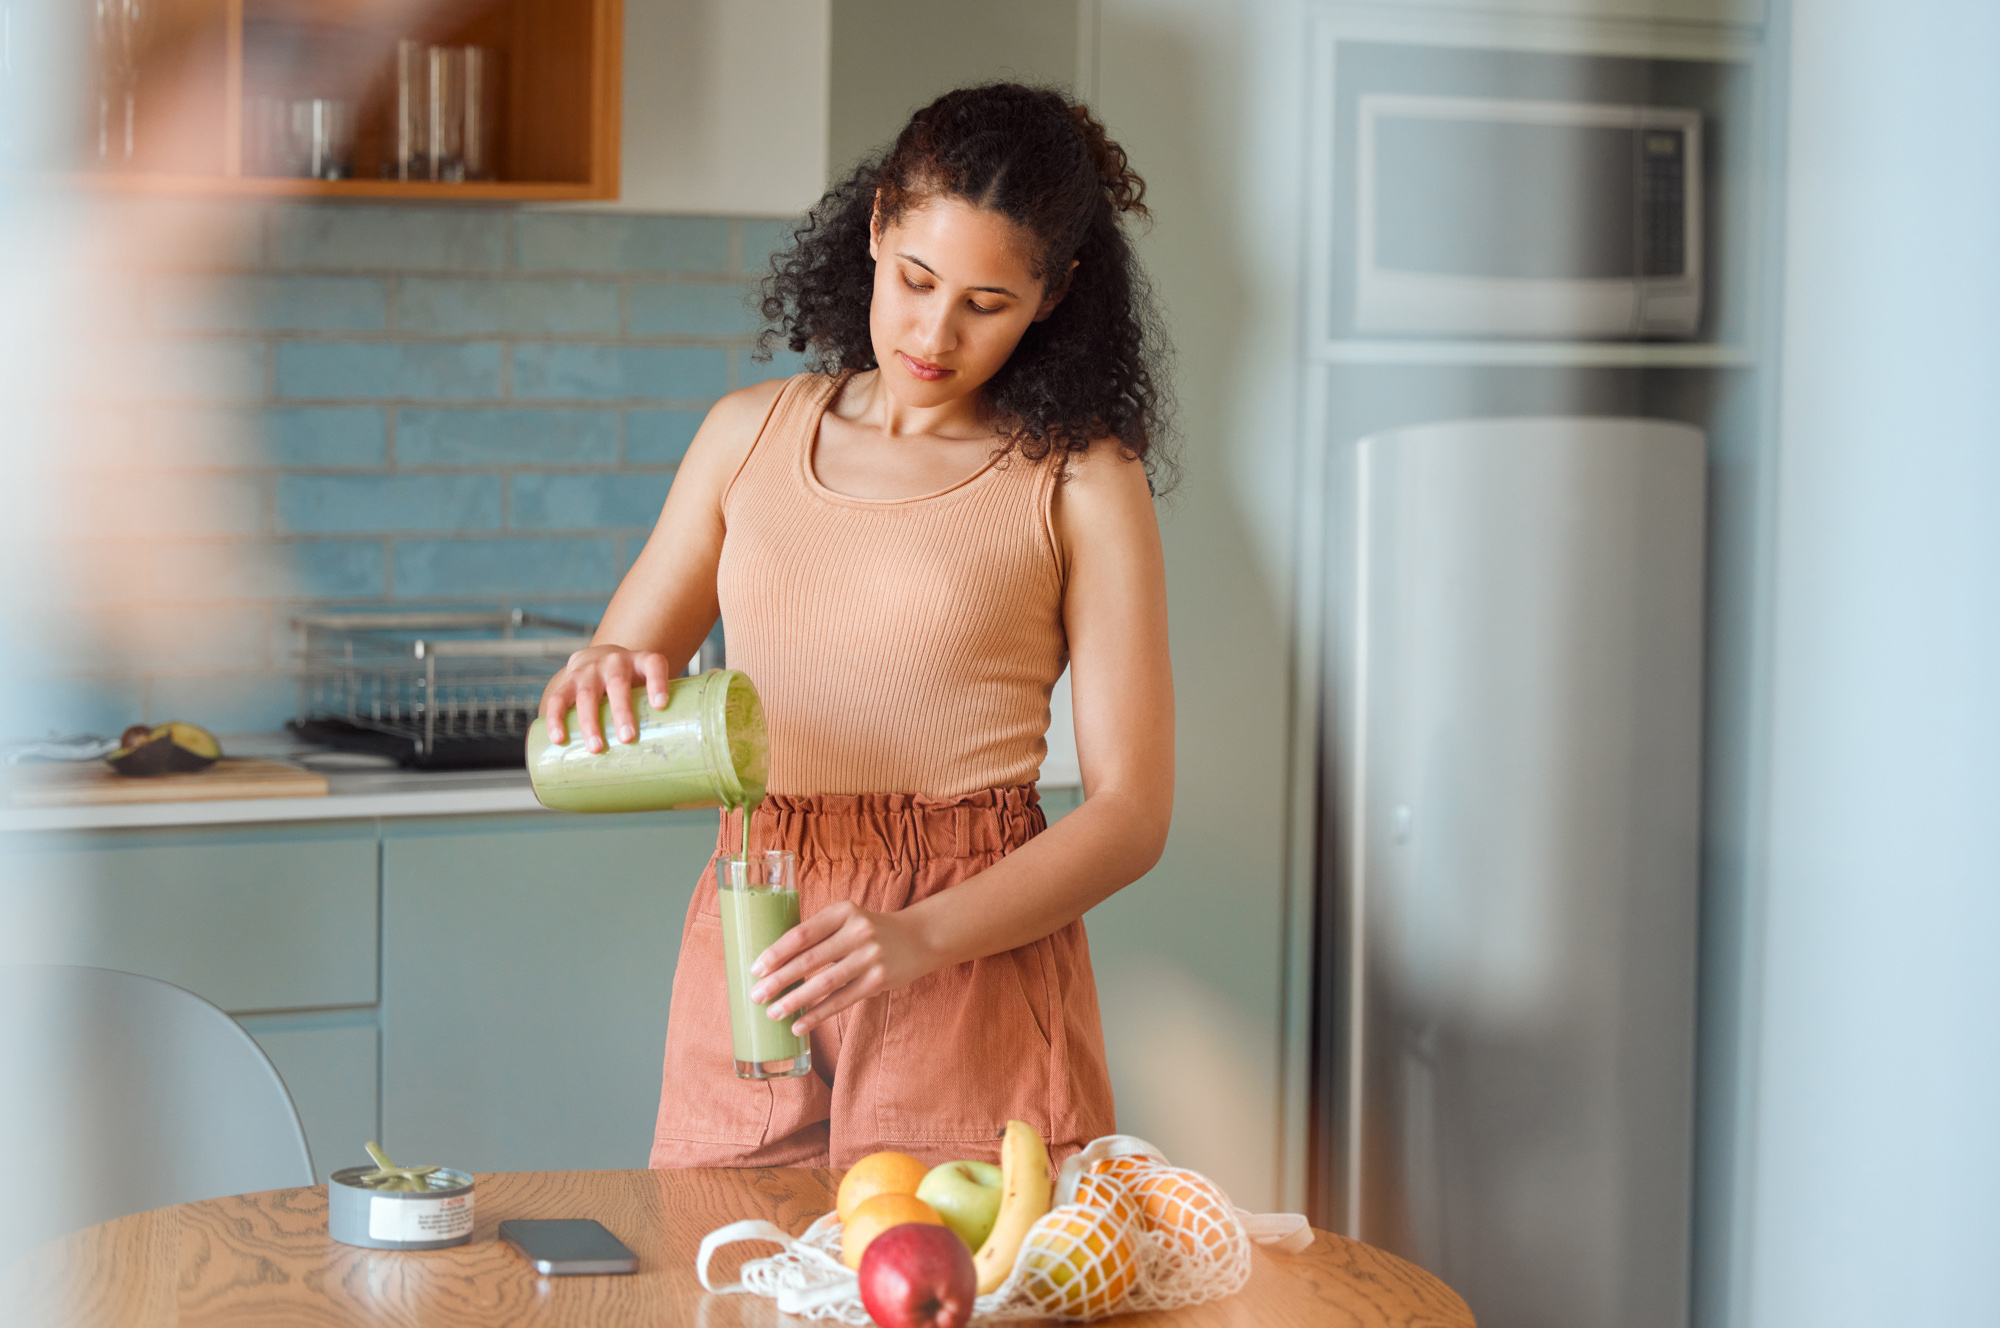 Young woman making a nutritious meal to support medical weight loss